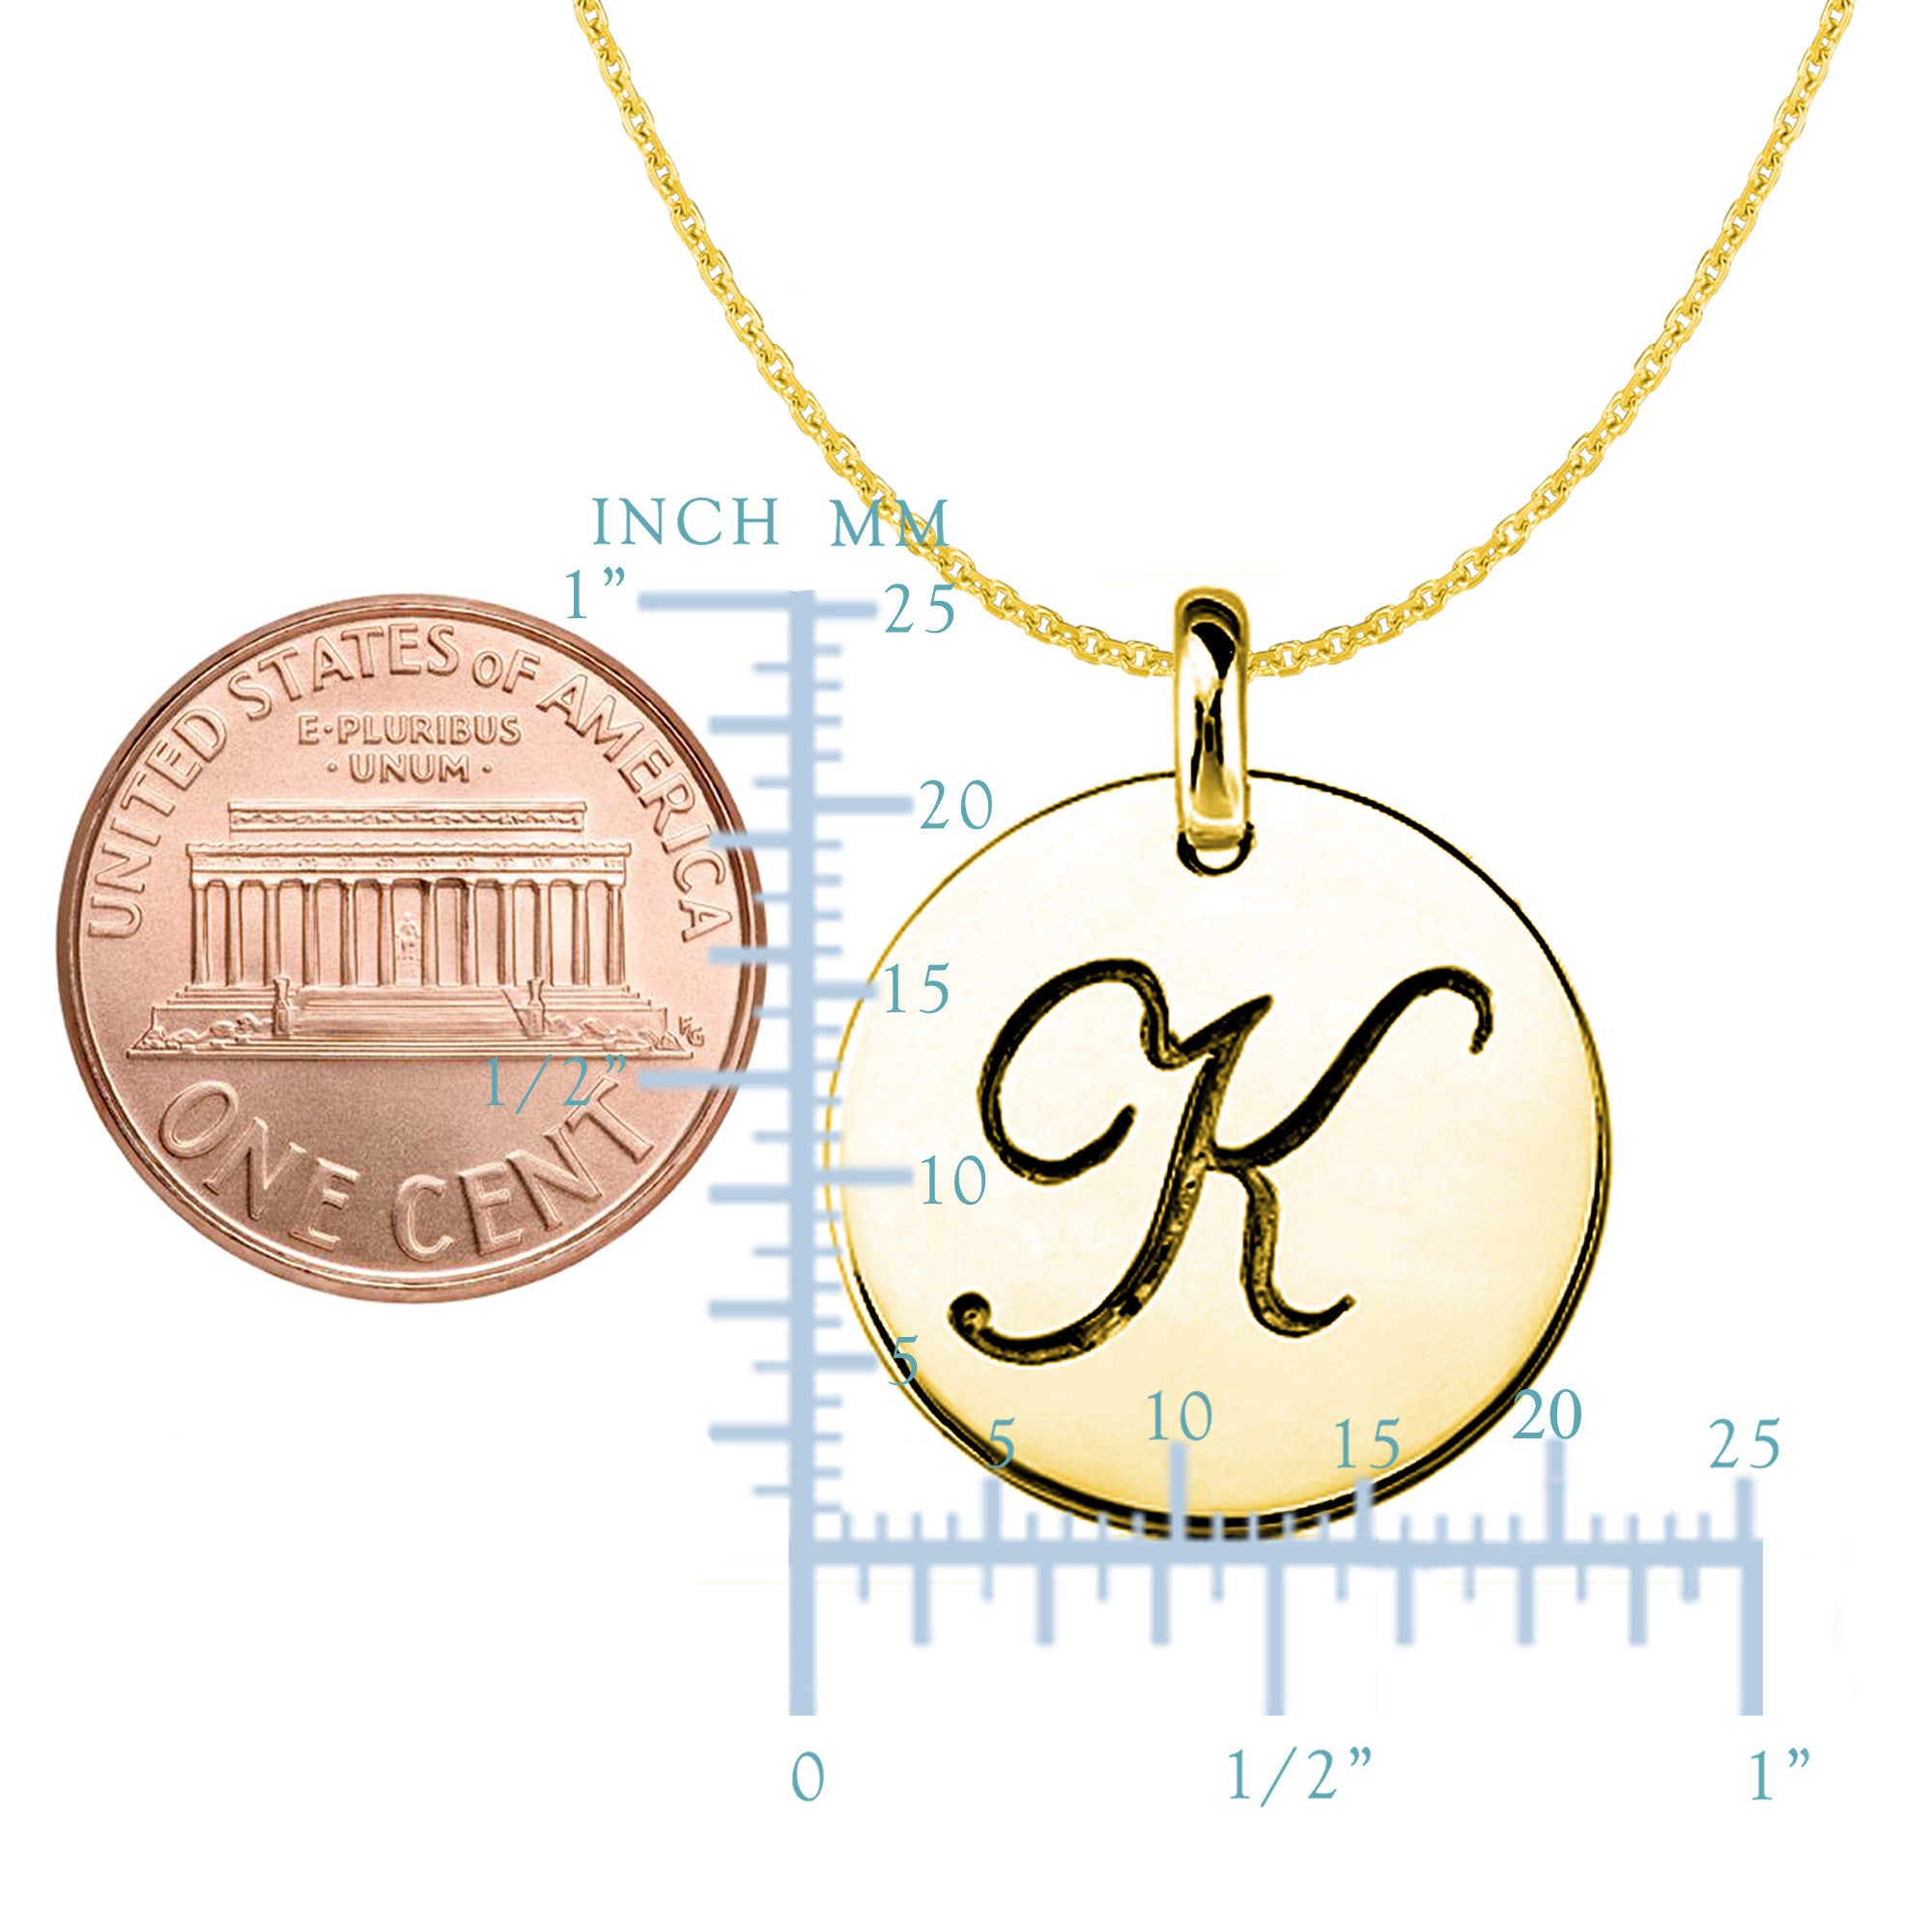 "K" 14K Yellow Gold Script Engraved Initial Disk Pendant fine designer jewelry for men and women